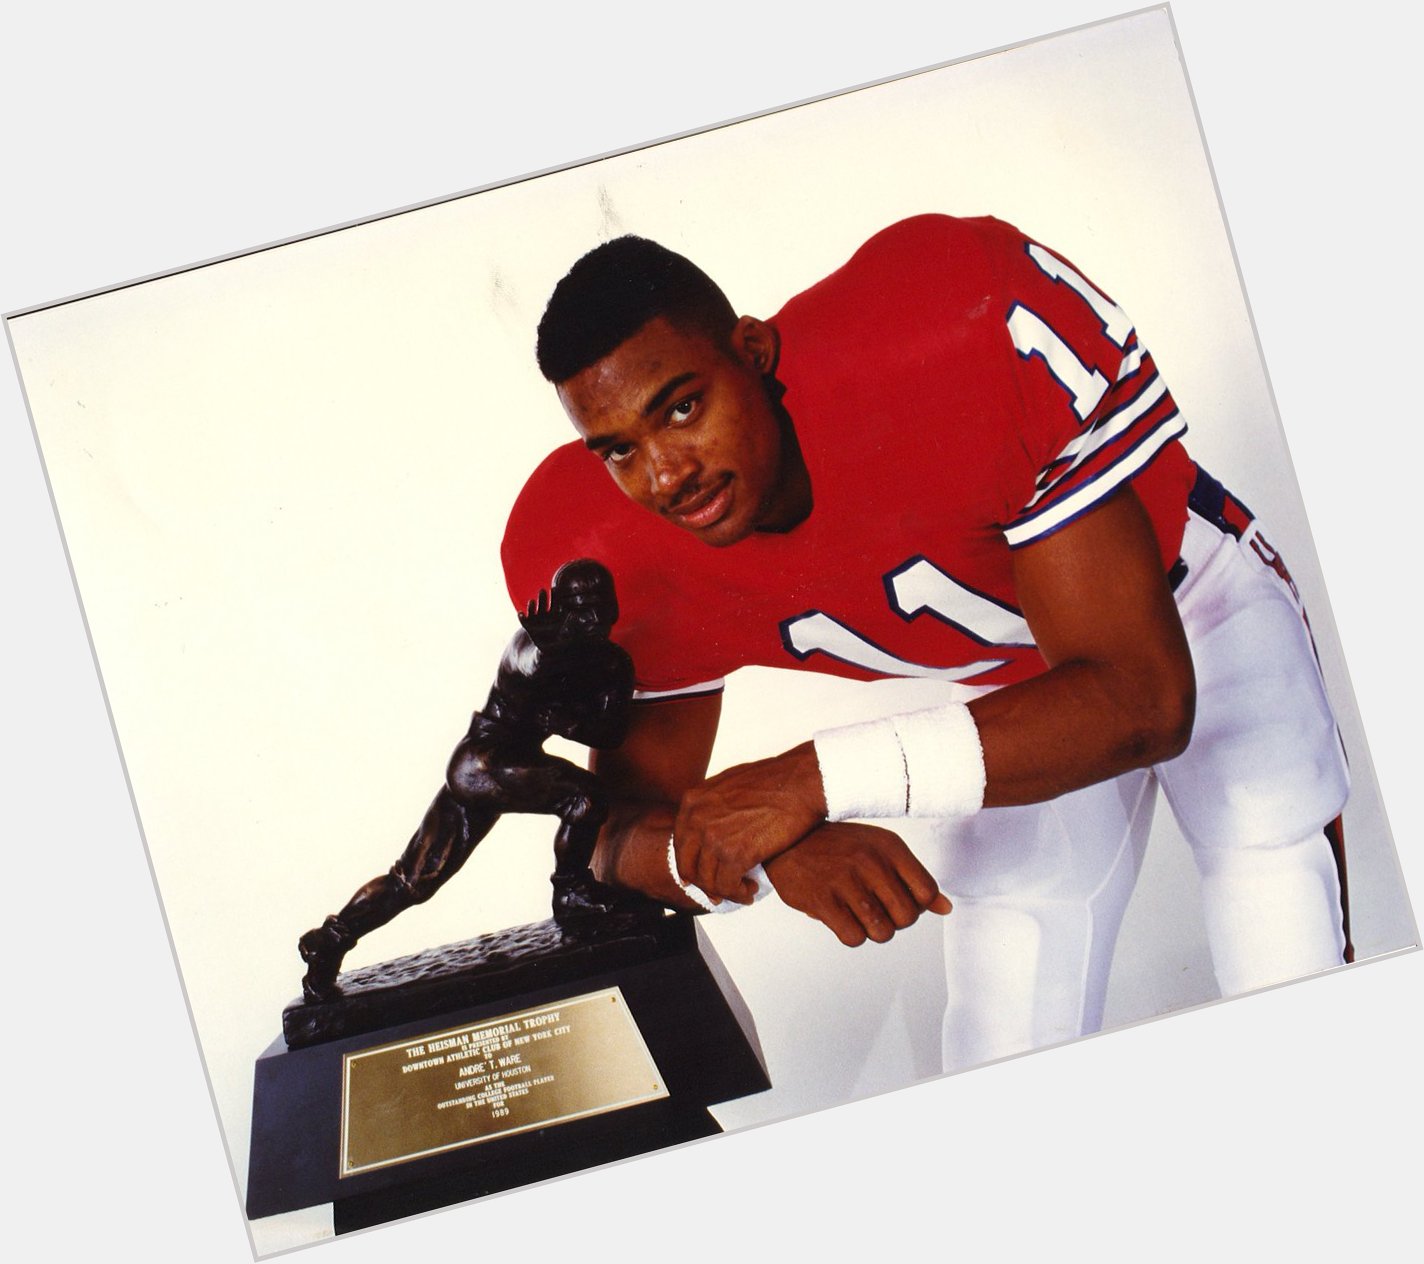 Happy 49th birthday to Houston legend and Heisman winner Andre Ware! 